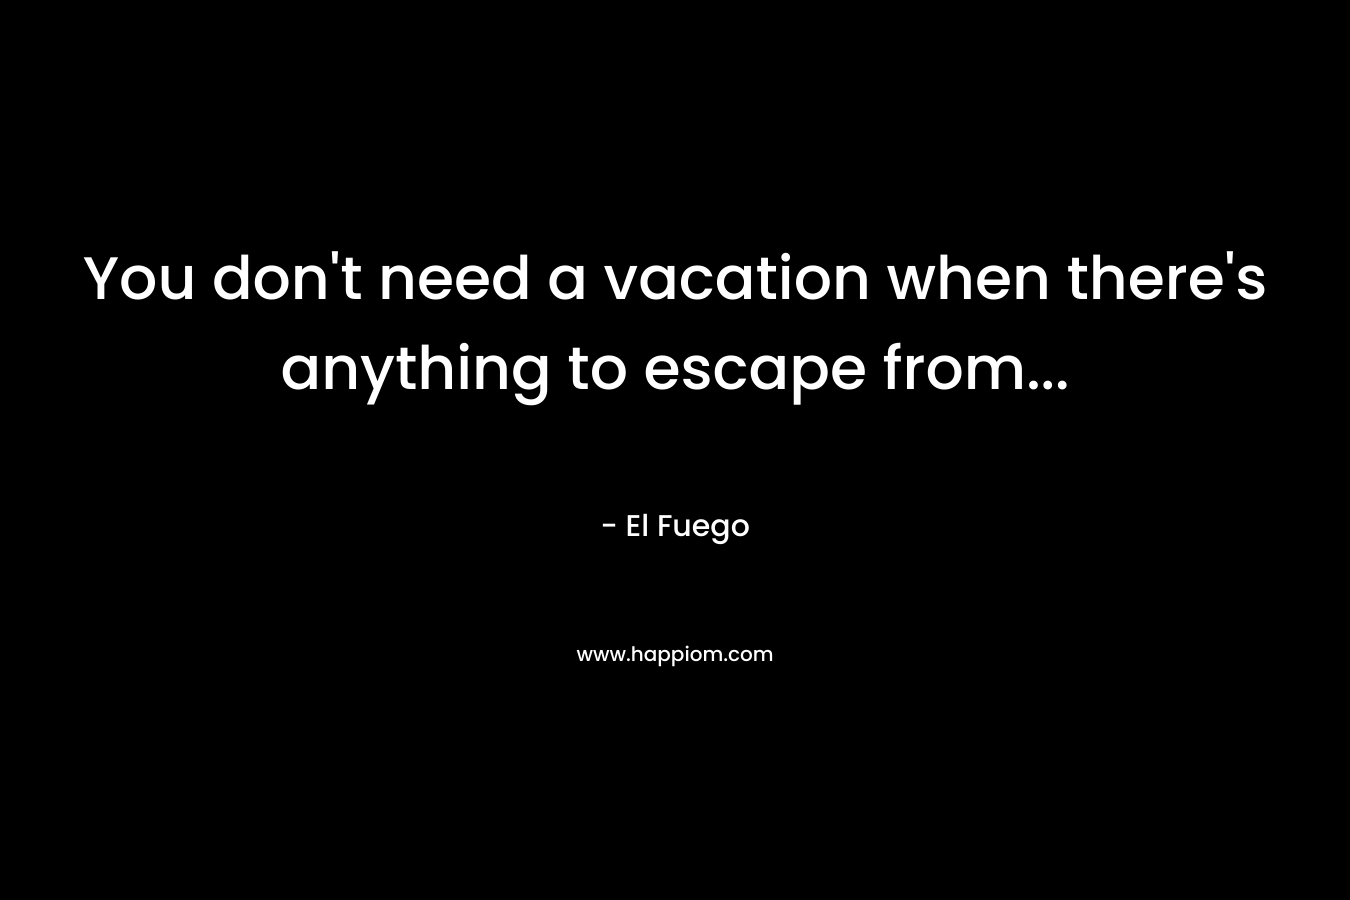 You don't need a vacation when there's anything to escape from...